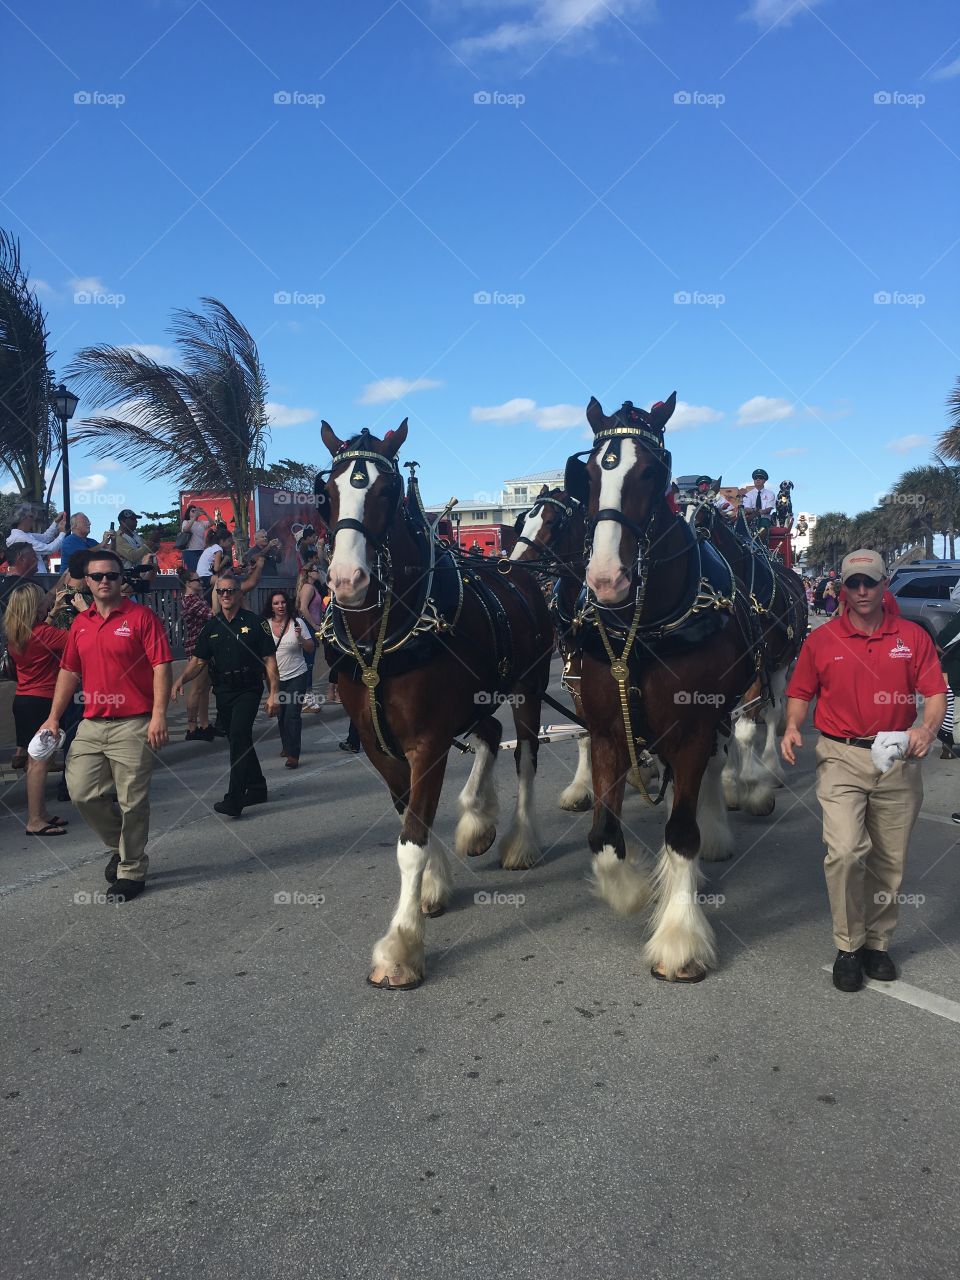 Budweiser horse pulling wagon Clydesdales